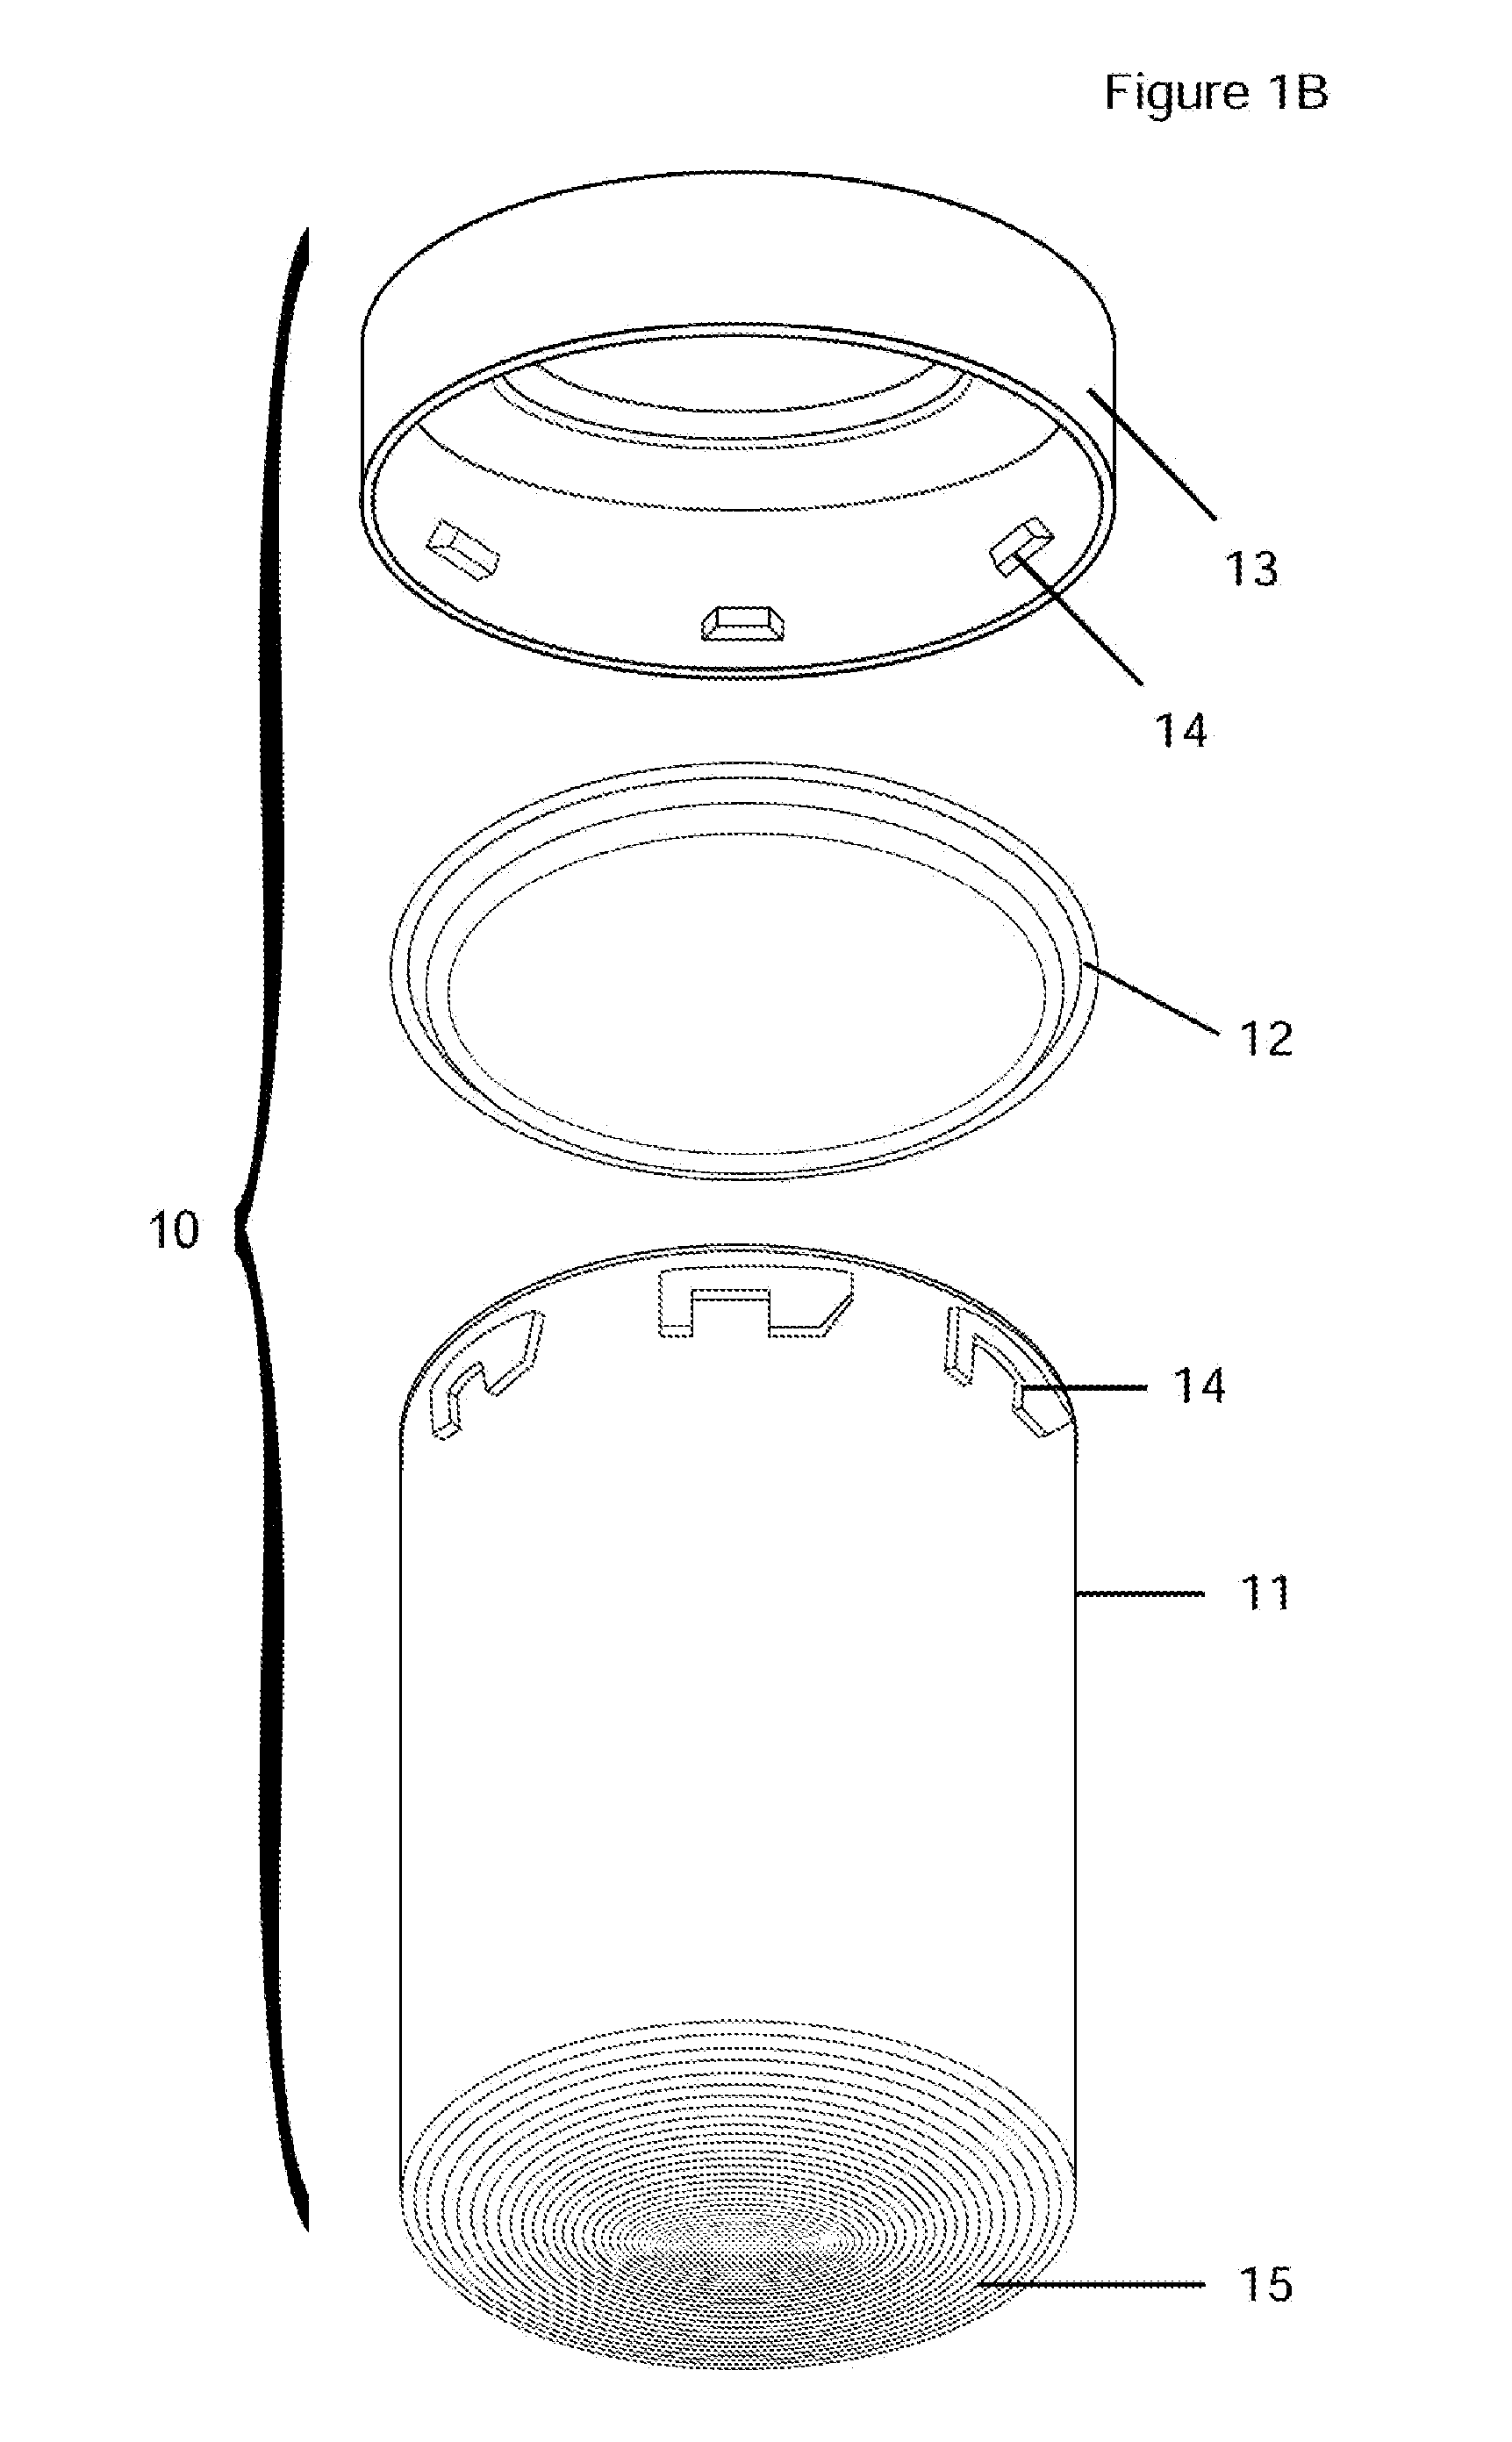 Medication container with fresnel lens